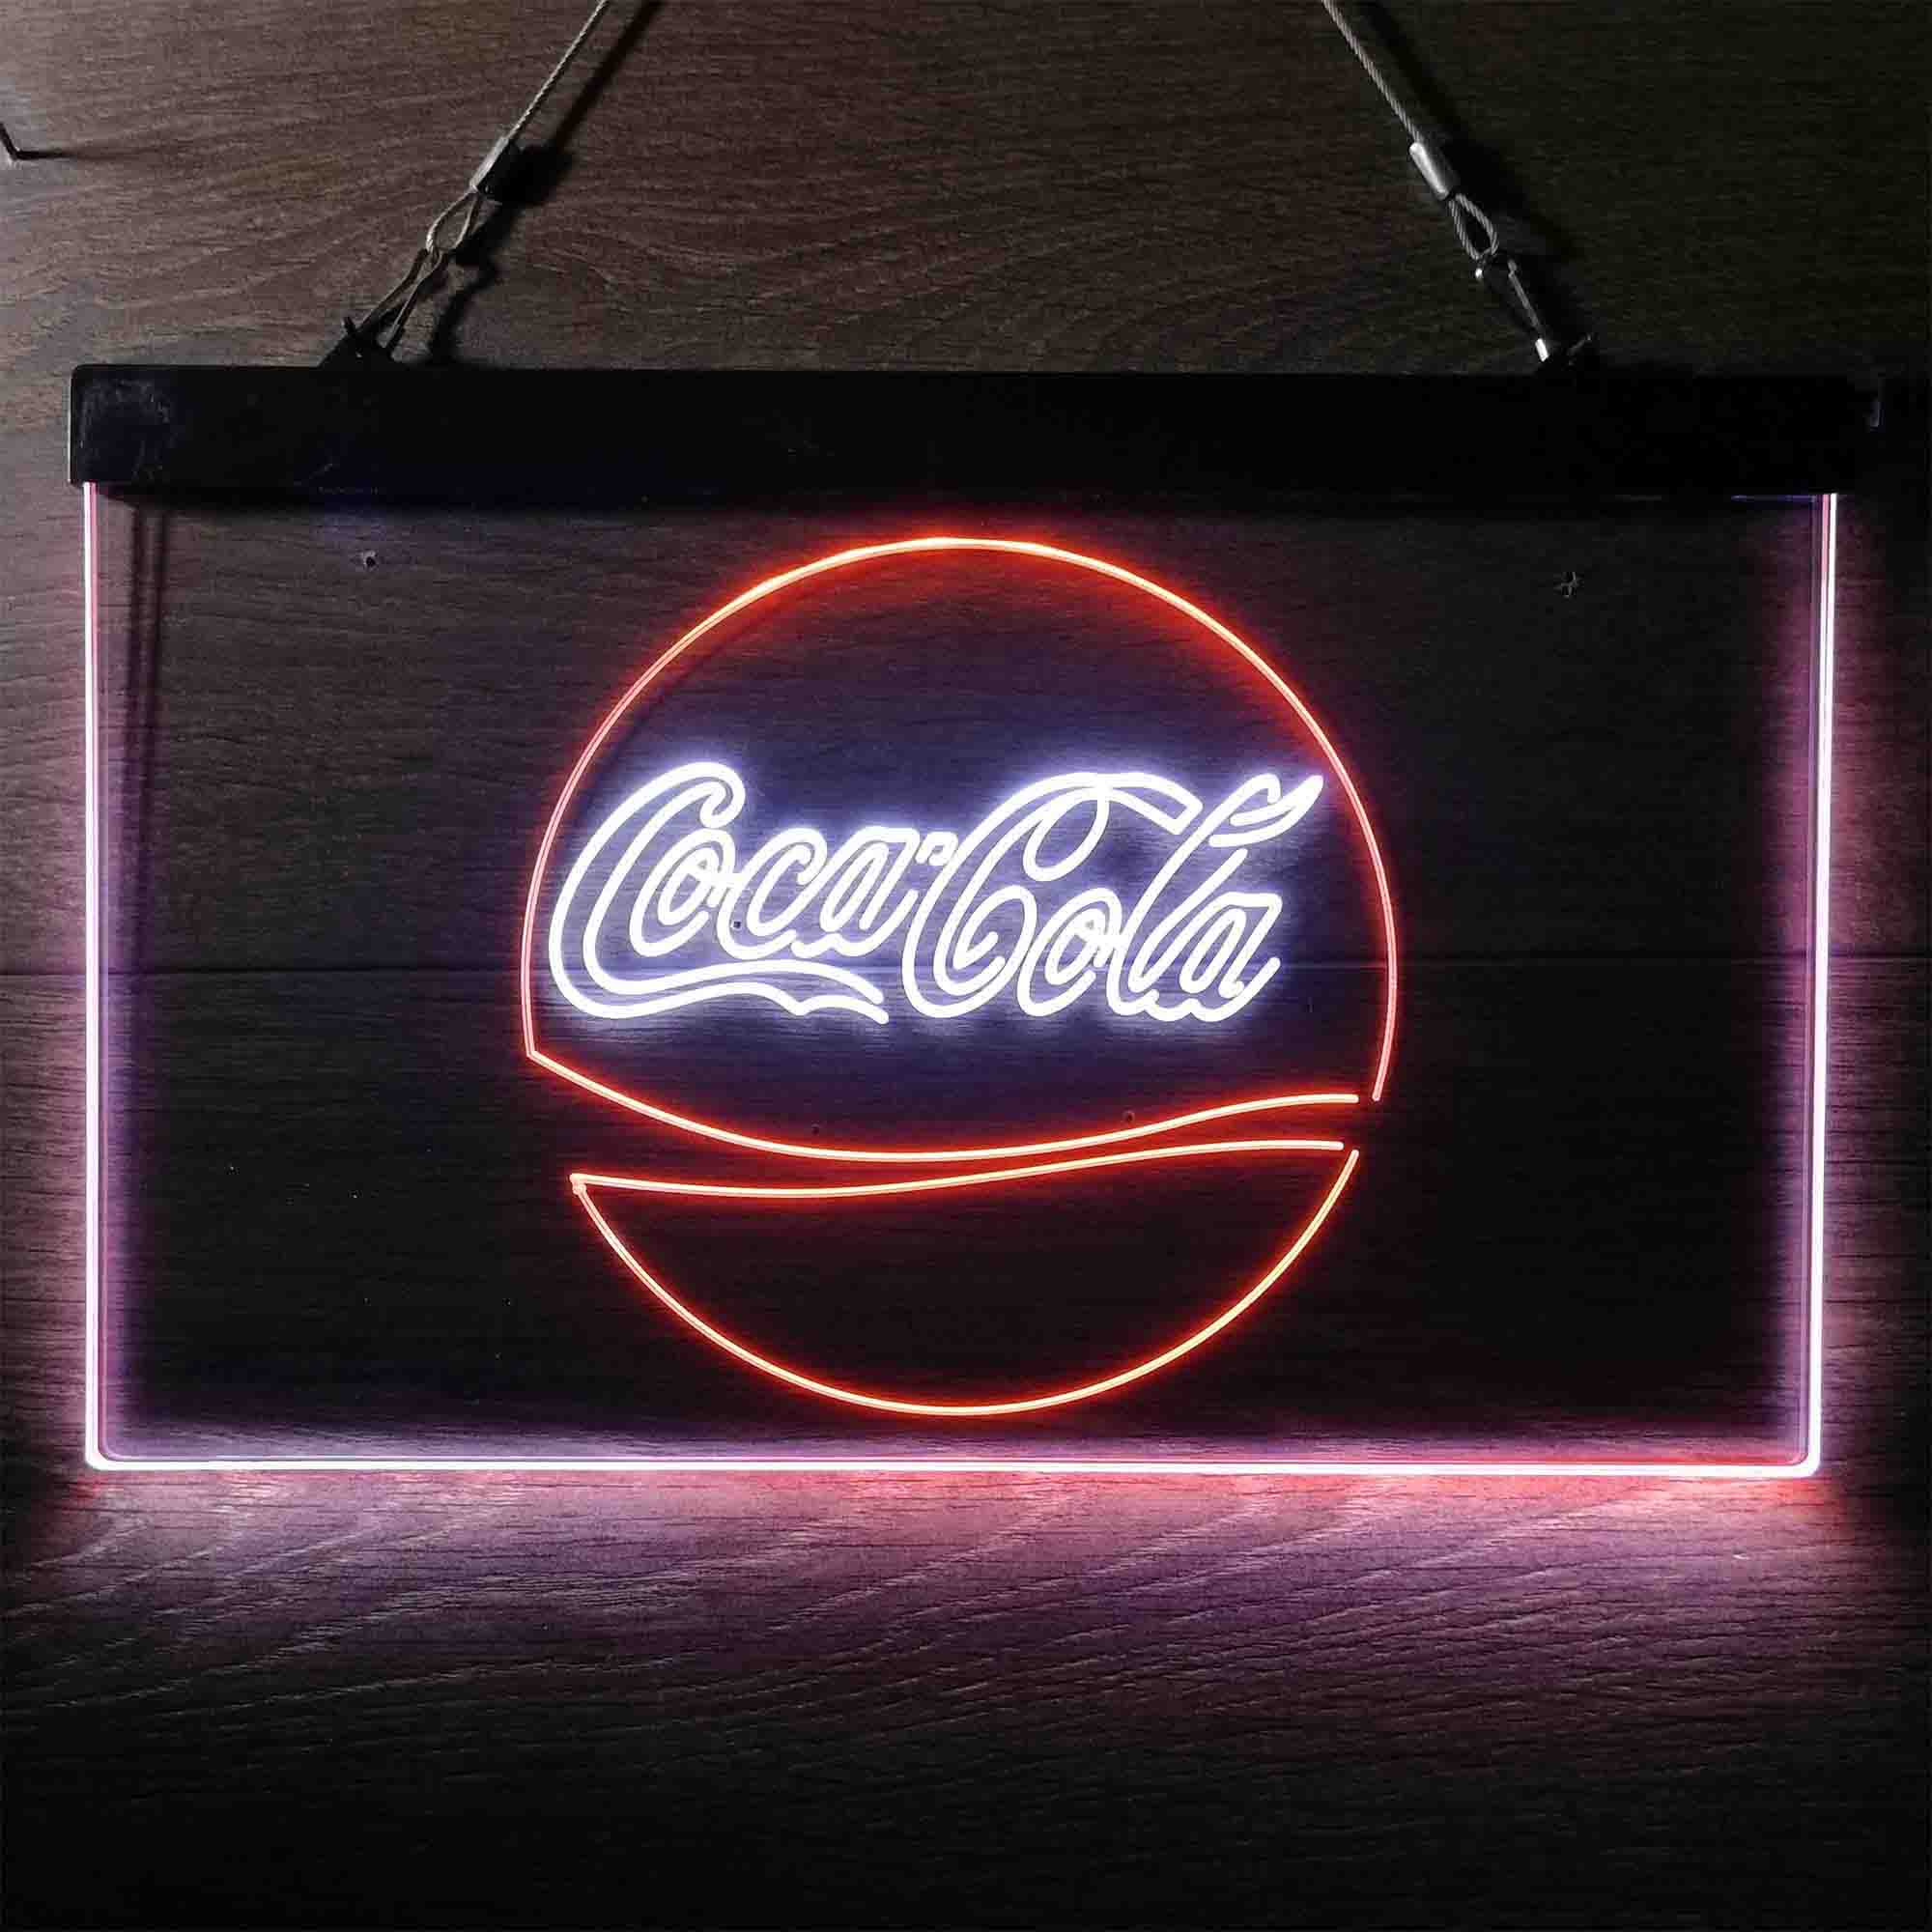 Coca Cola Classic Soft Drink Neon-Like LED Sign Home Bar Gift